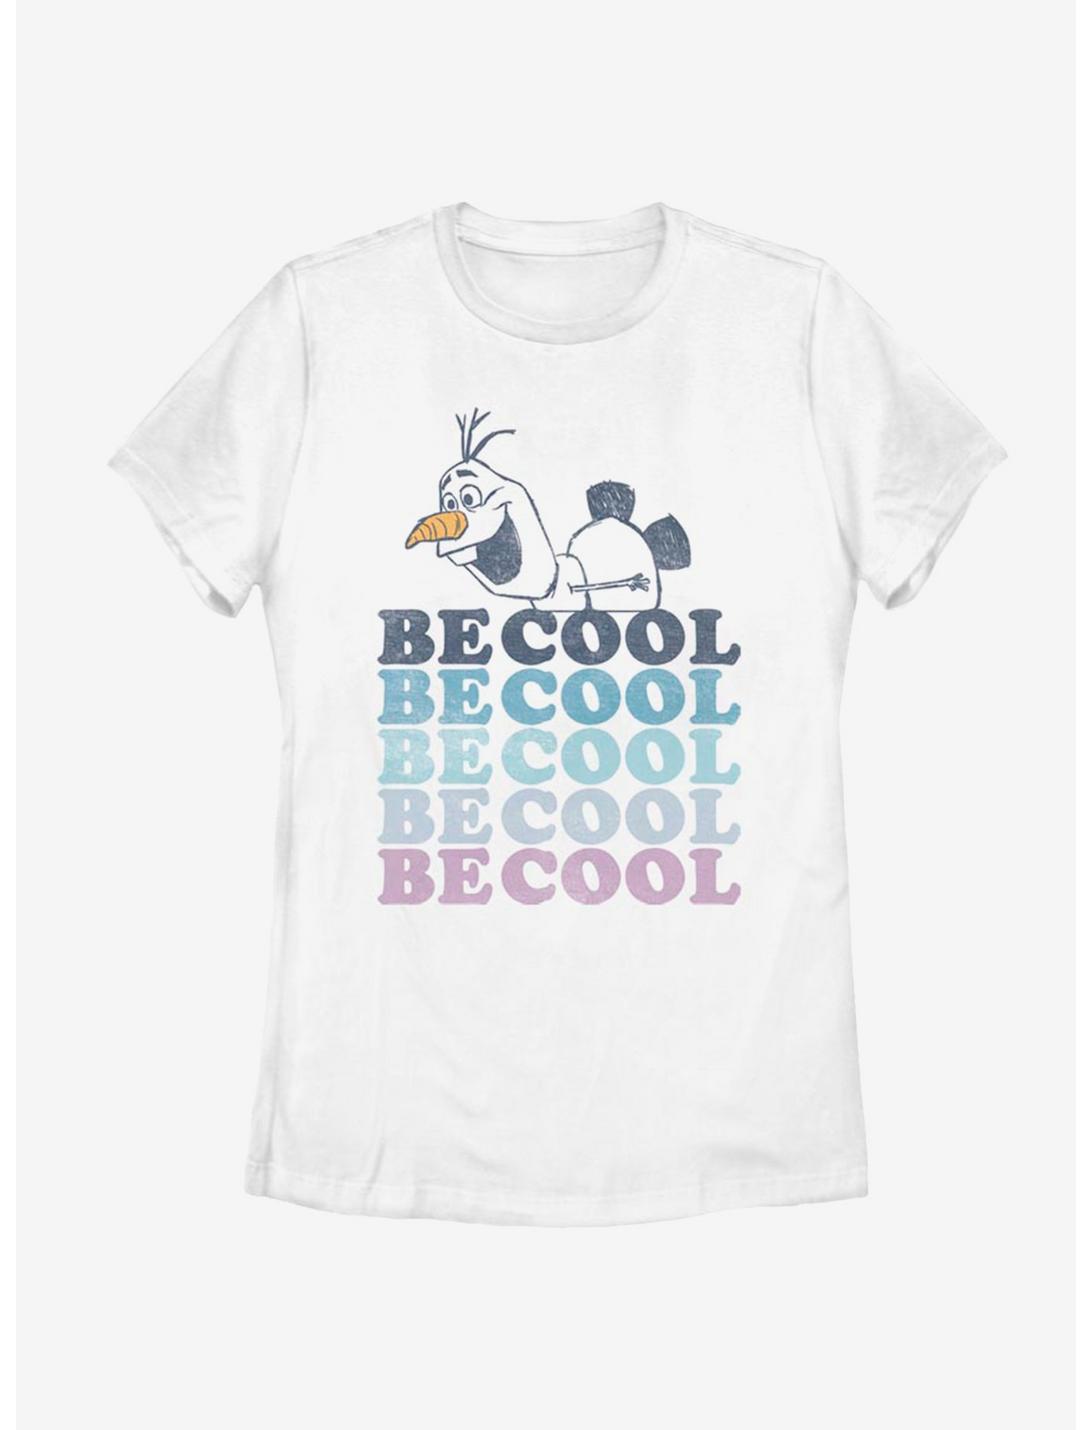 Disney Frozen 2 Olaf Be Cool Womens T-Shirt, WHITE, hi-res